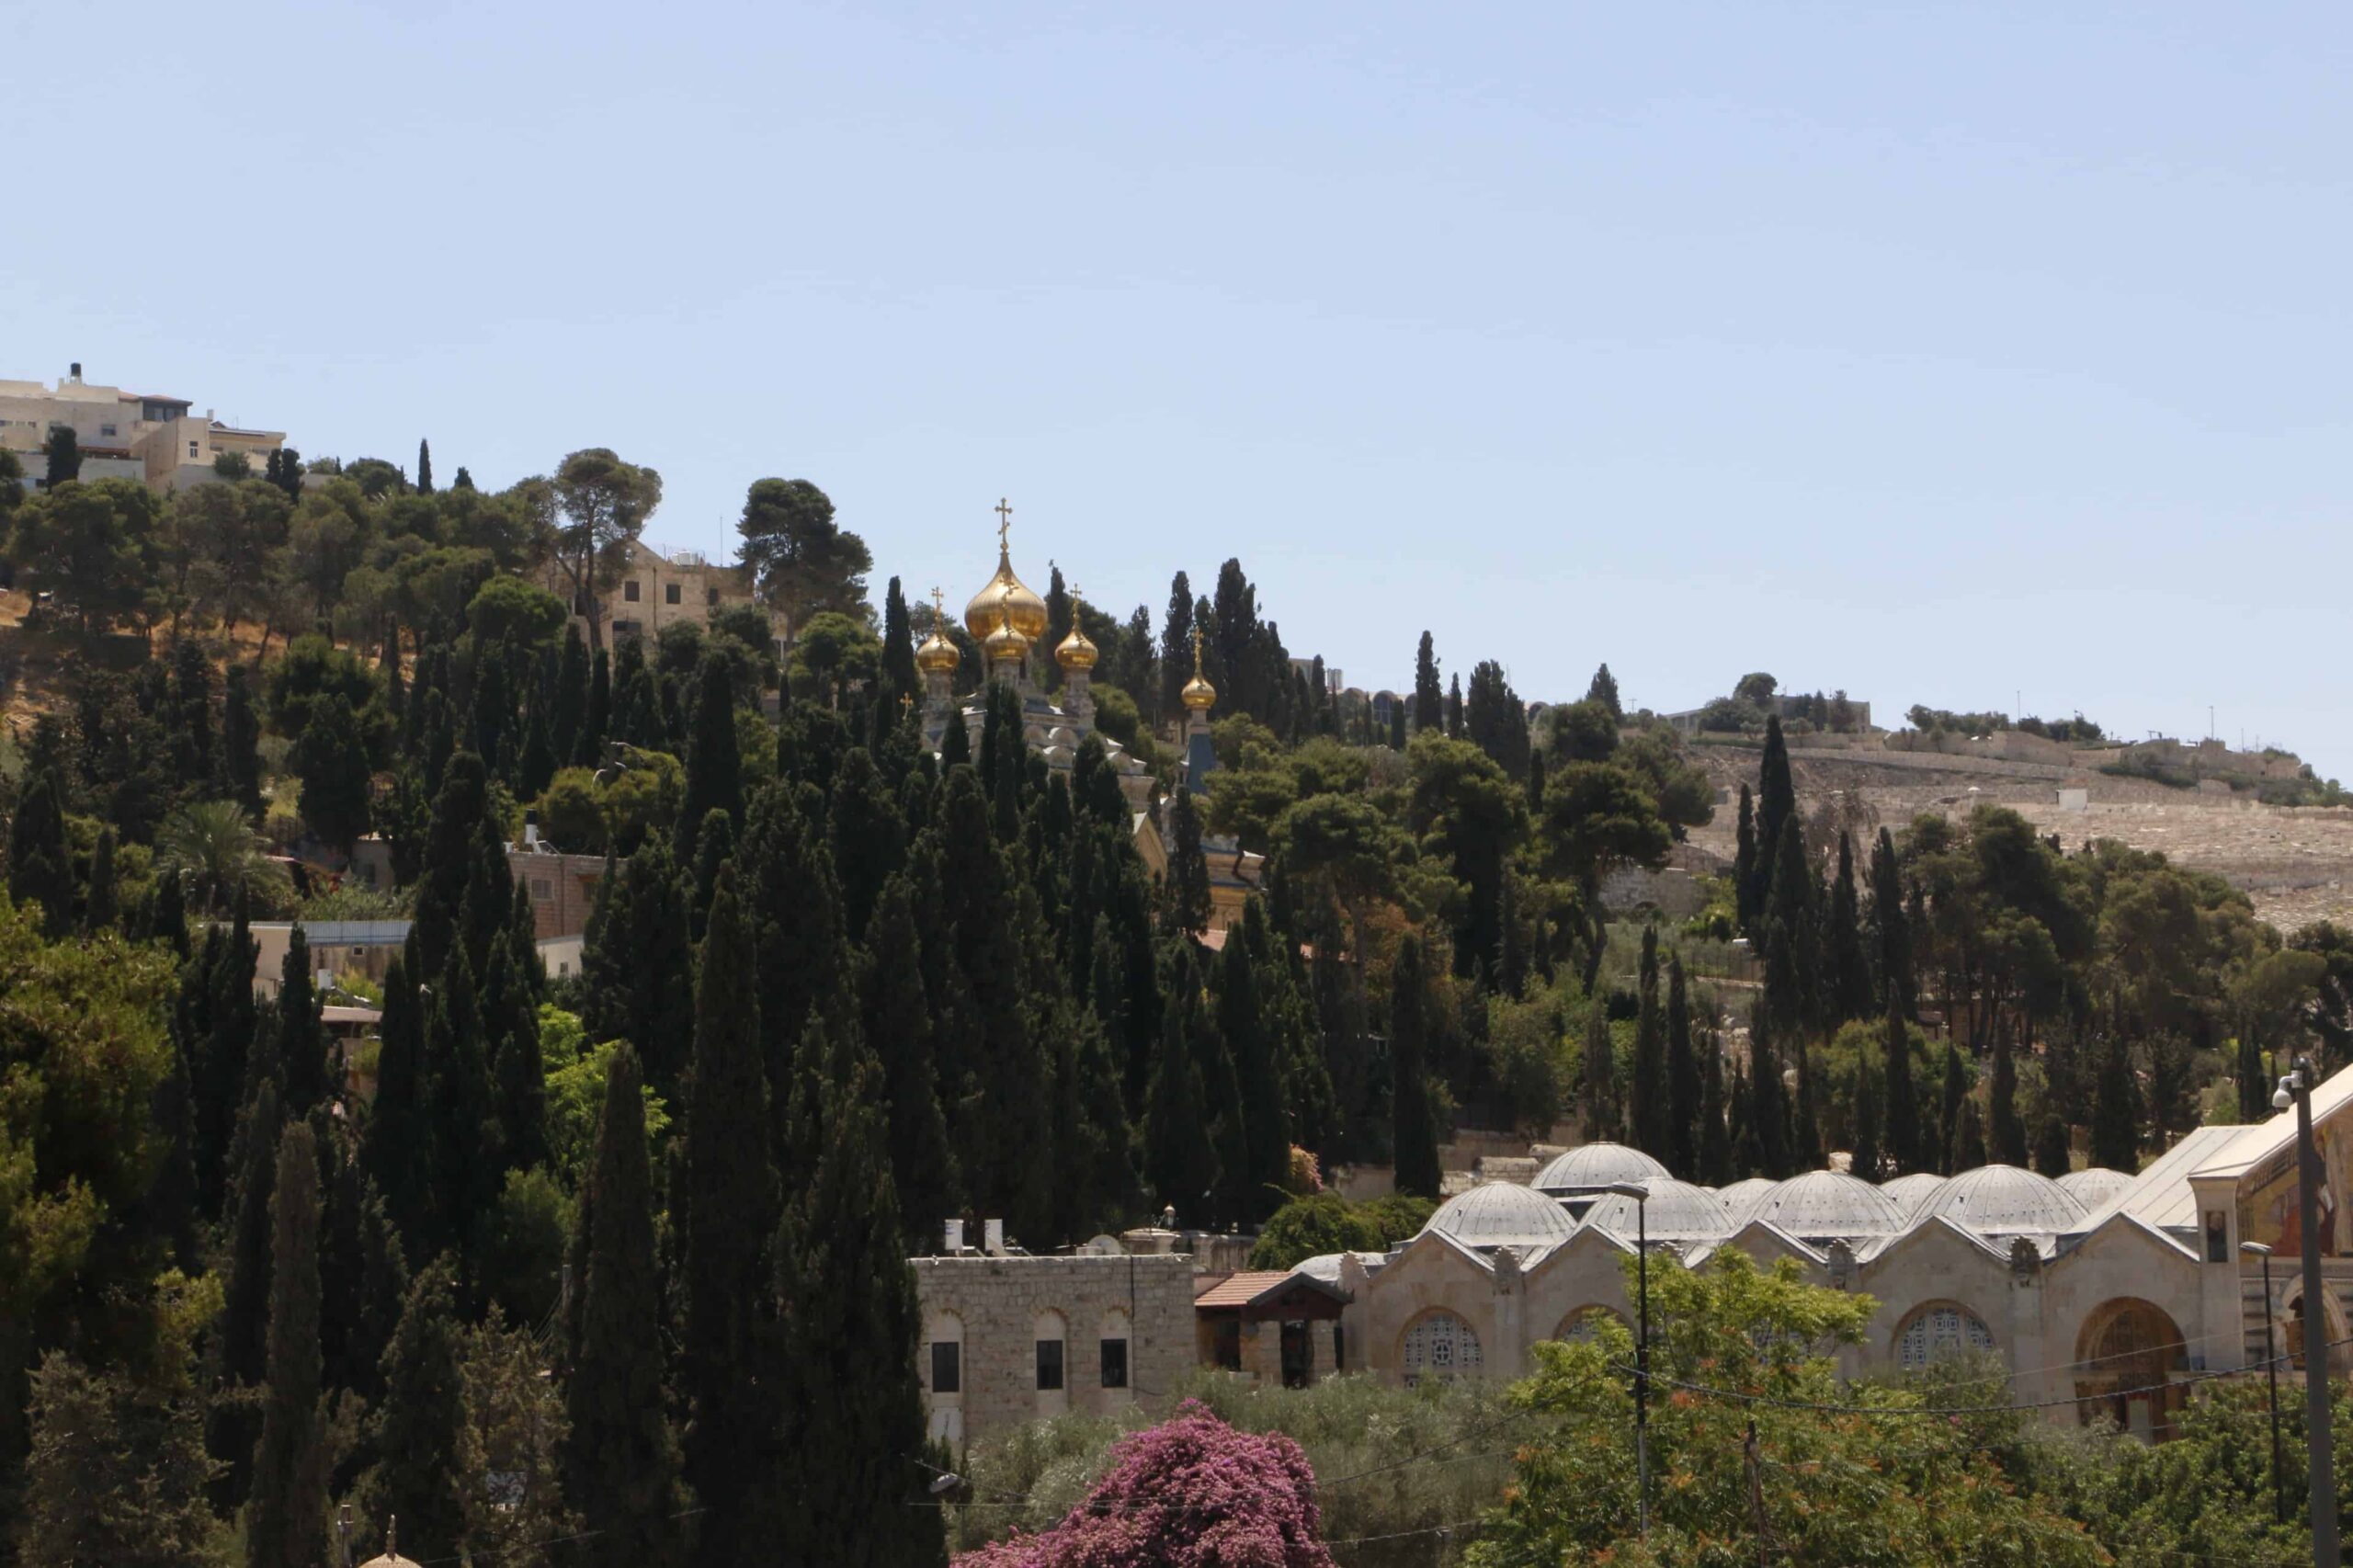 Saint Mary Magdalene’s Church, a hidden jewel in the Mount of Olives